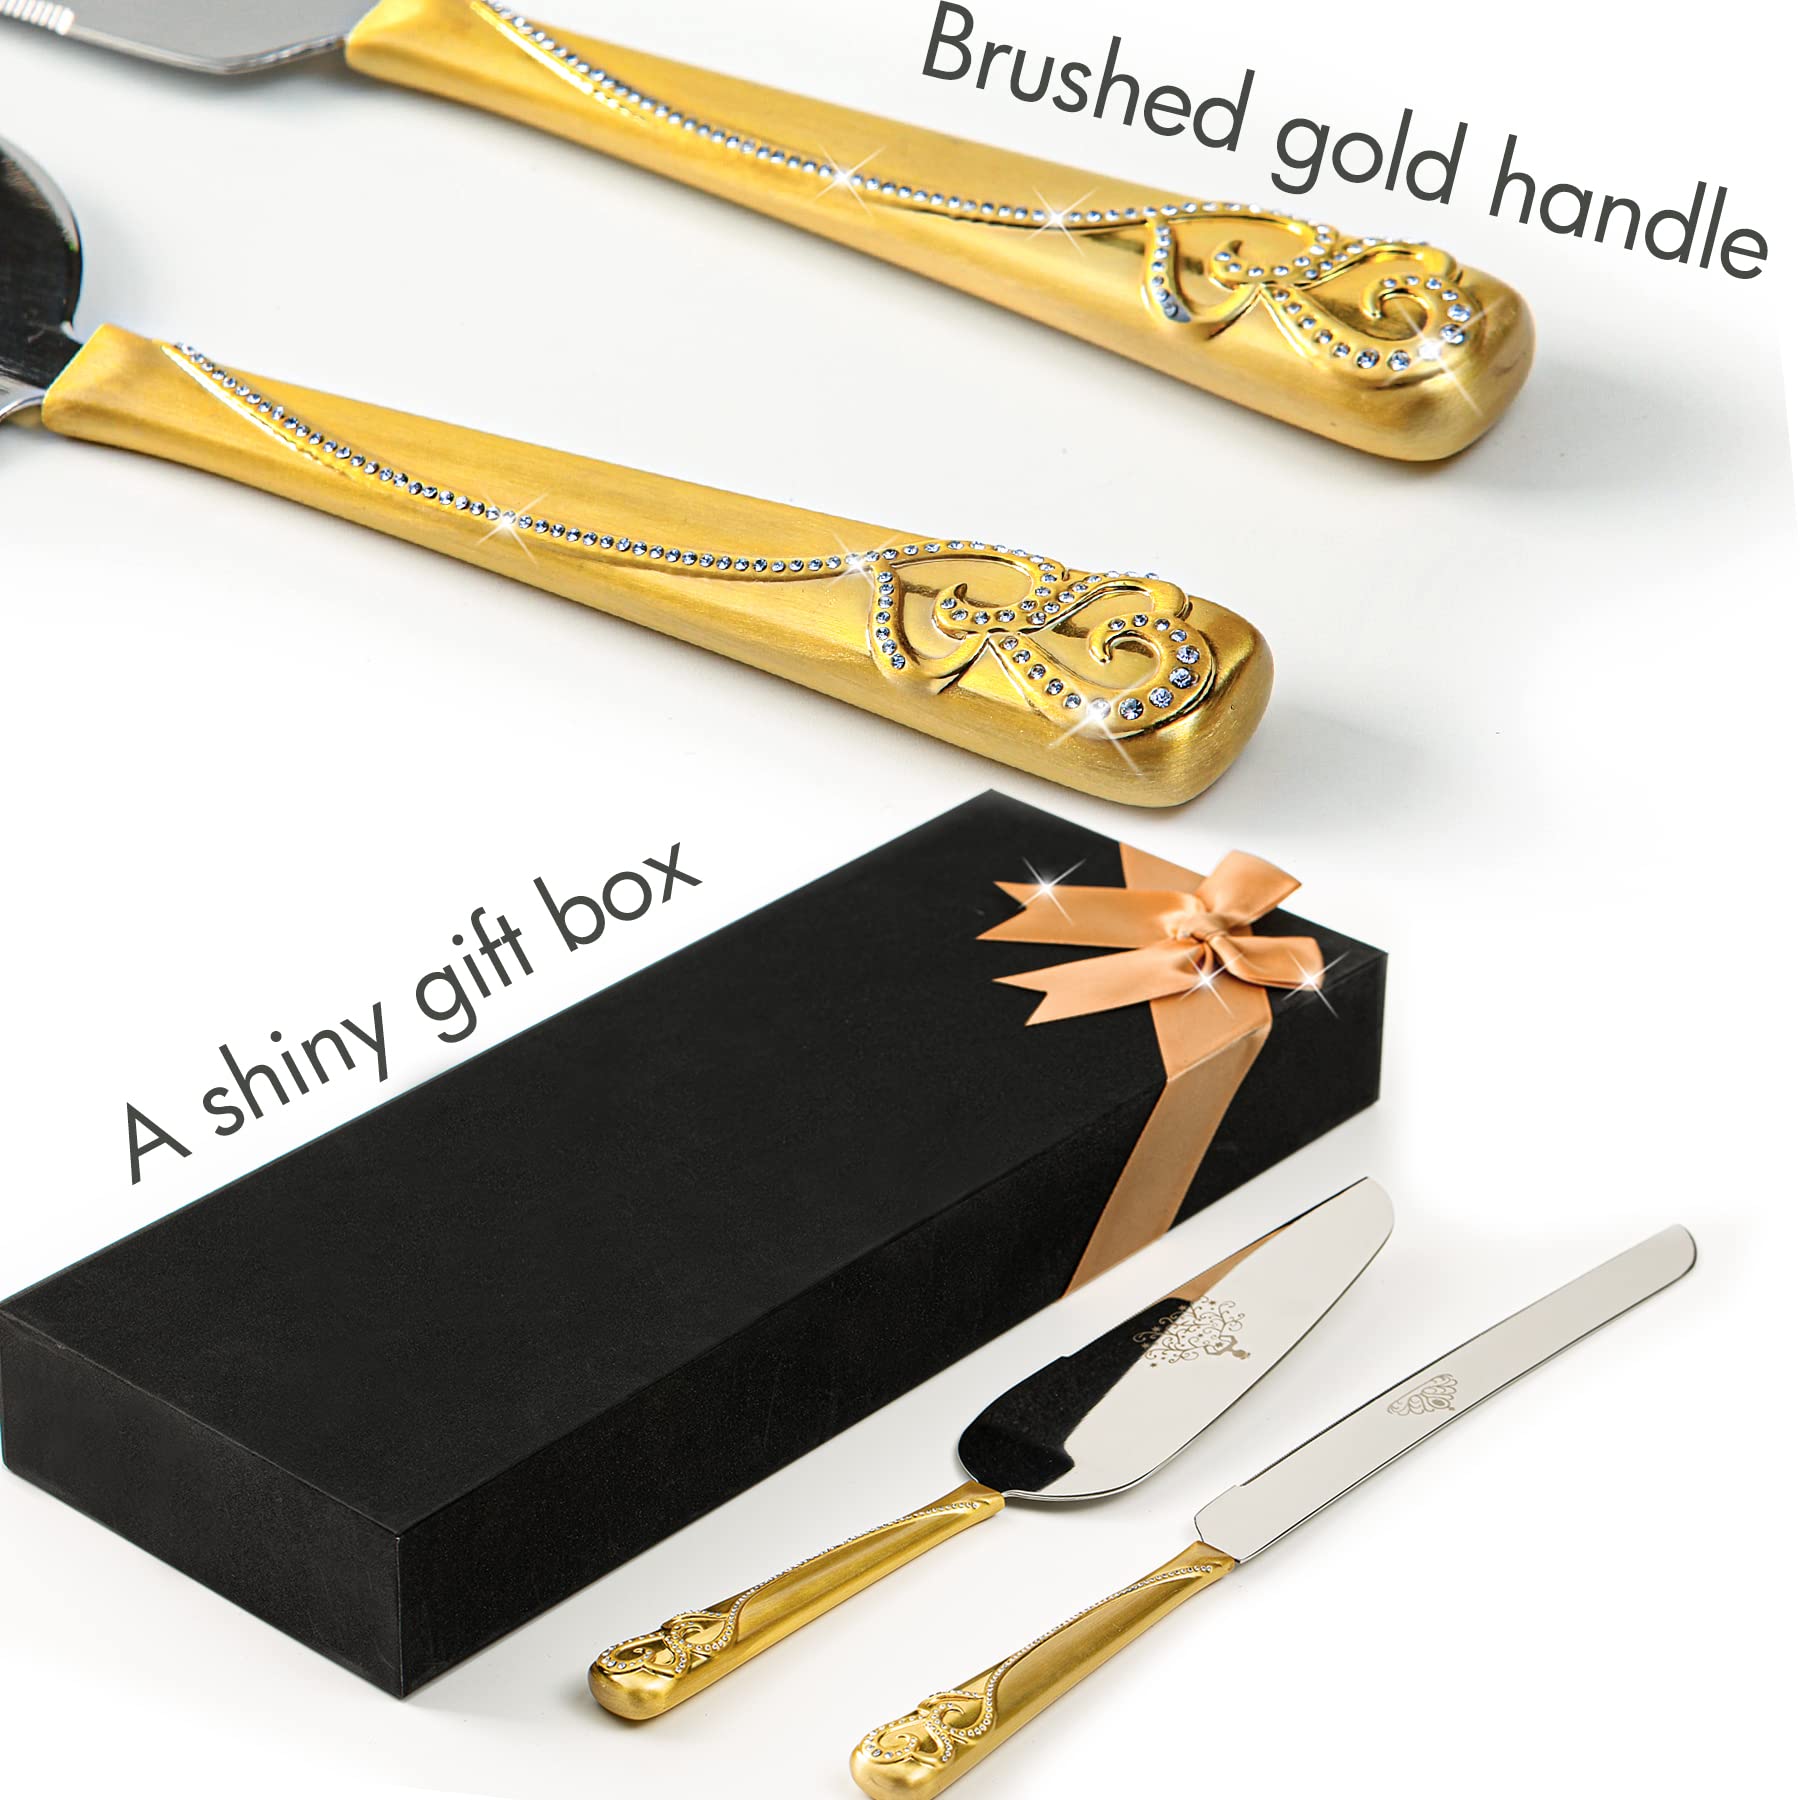 Sparking Love Hearts Cake Cutter and Pie Server Set, Stainless Steel Wedding Cake Knife and Server Set for Birthday, Anniversary, Engagement Or Christmas Gifts (Fashion gold)